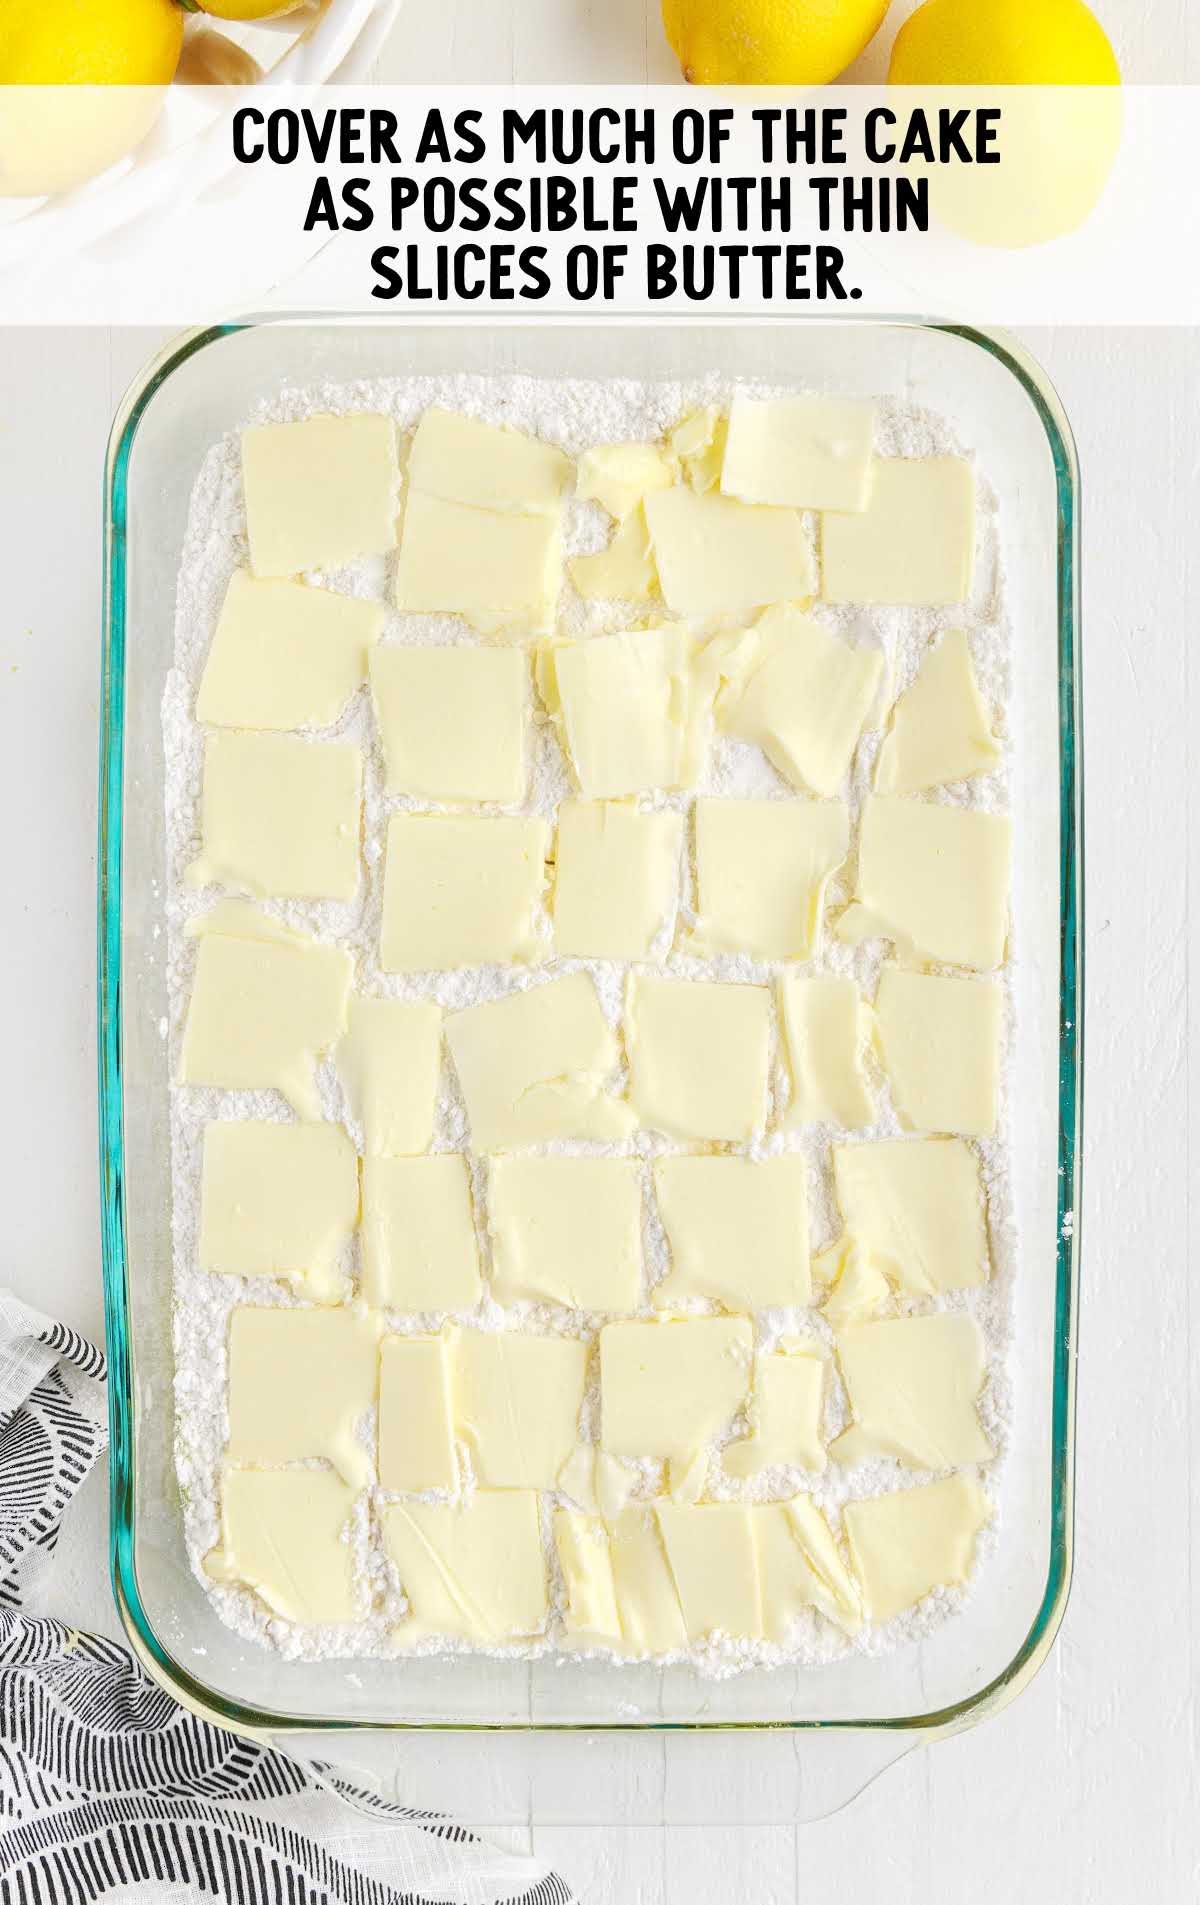 slices of butter placed on top of the cake mixture in a baking dish